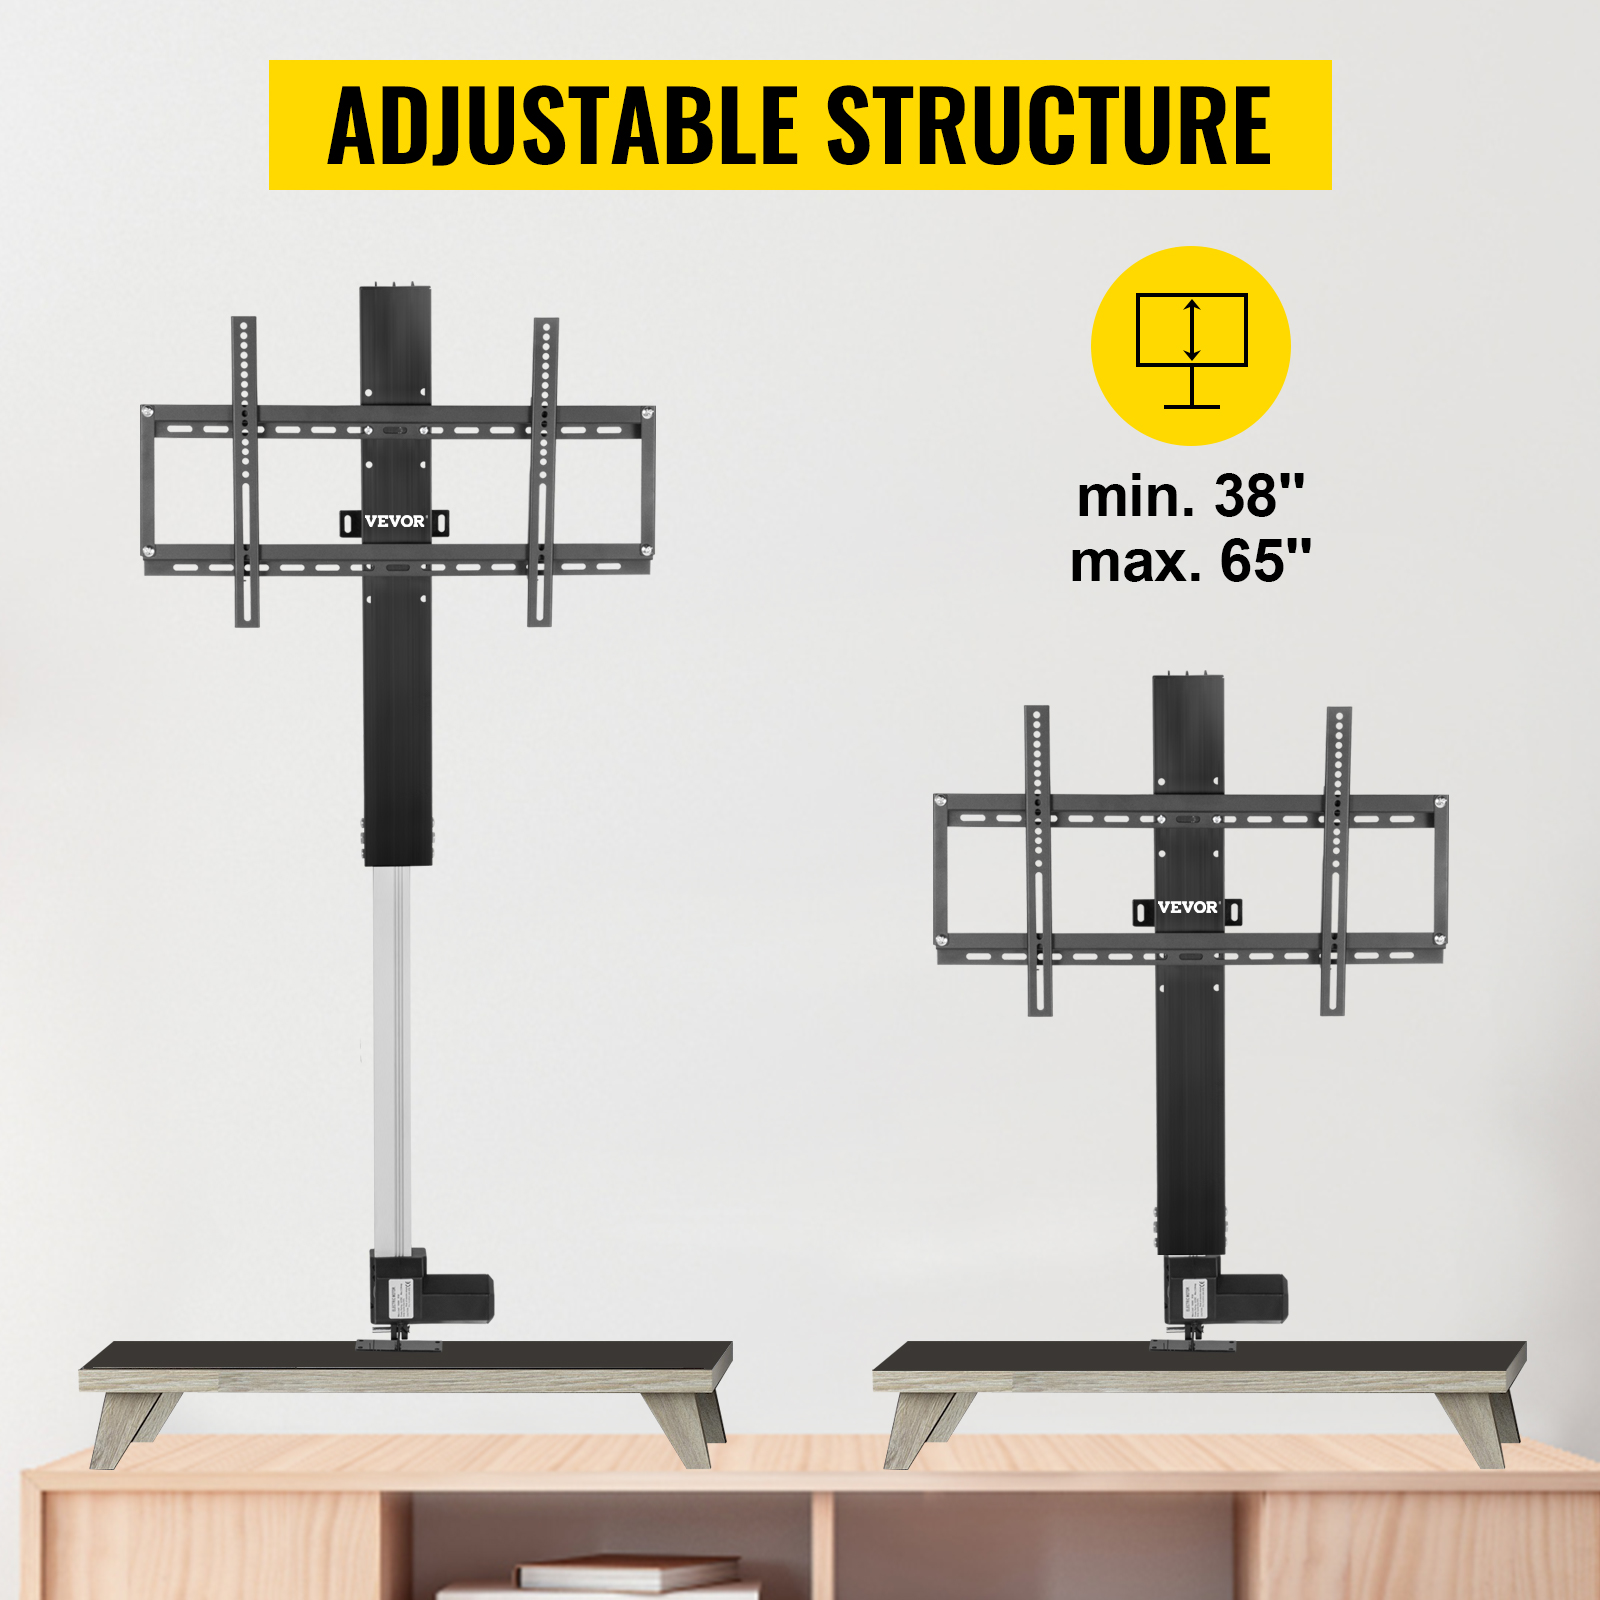 Motorized TV Lift Stroke Length 39.4 in. Motorized TV Mount Fit for 32-70 in. TV Lift with Height Adjust 28.74-68.11 in.